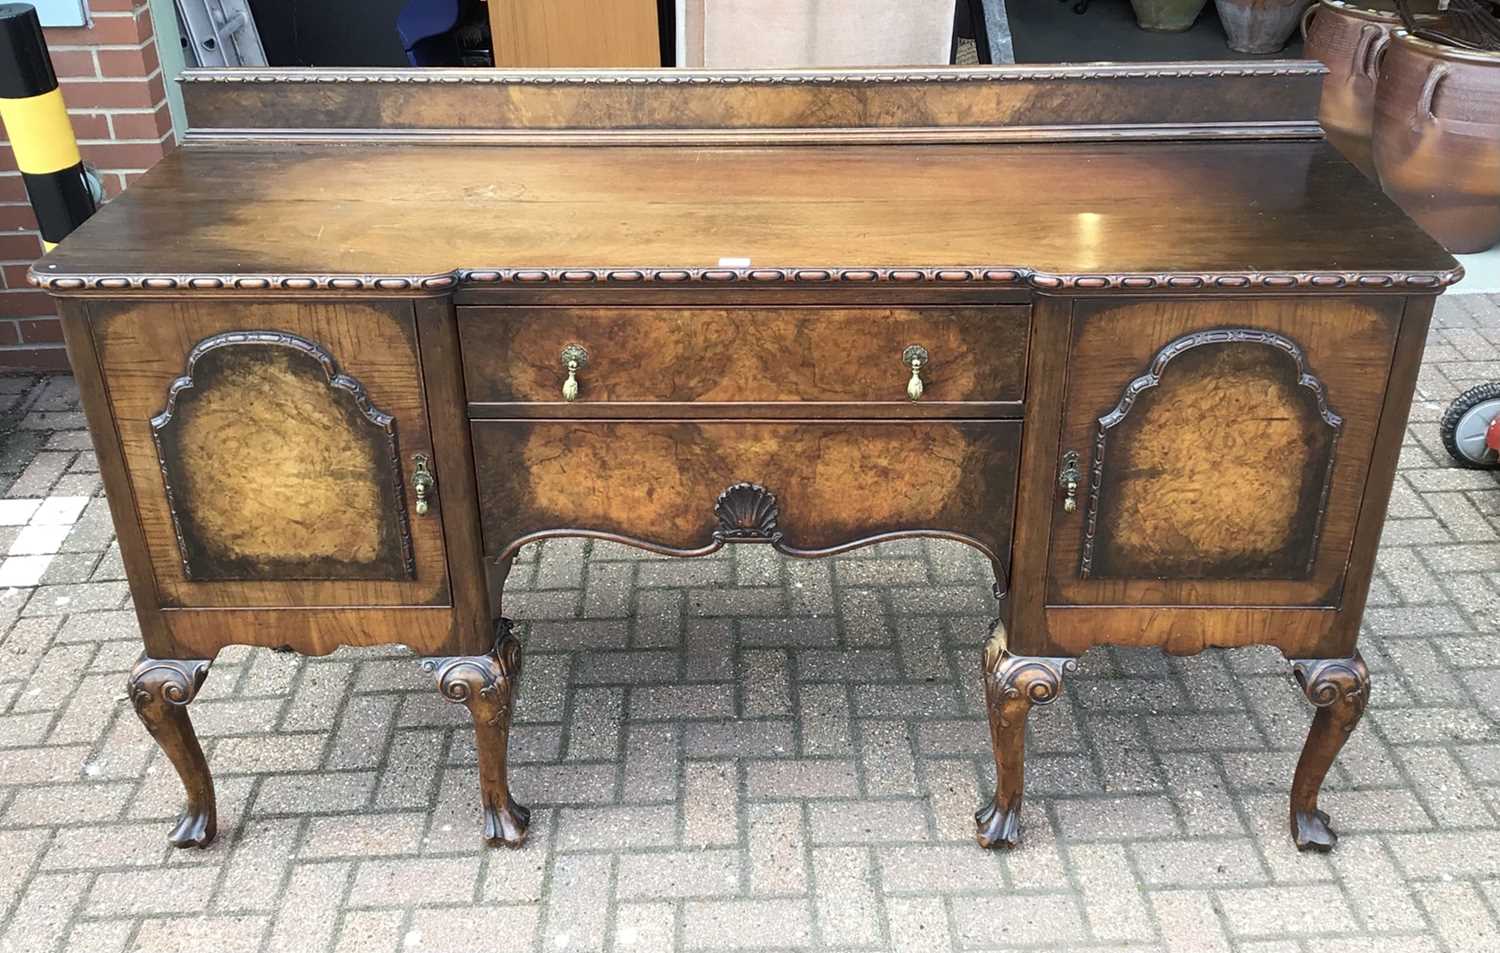 Lot 62 - Good quality walnut sideboard with raised ledge back, two central drawers below flanked by cupboards on carved cabriol legs 183cm wide x 58cm deep x 110cm high